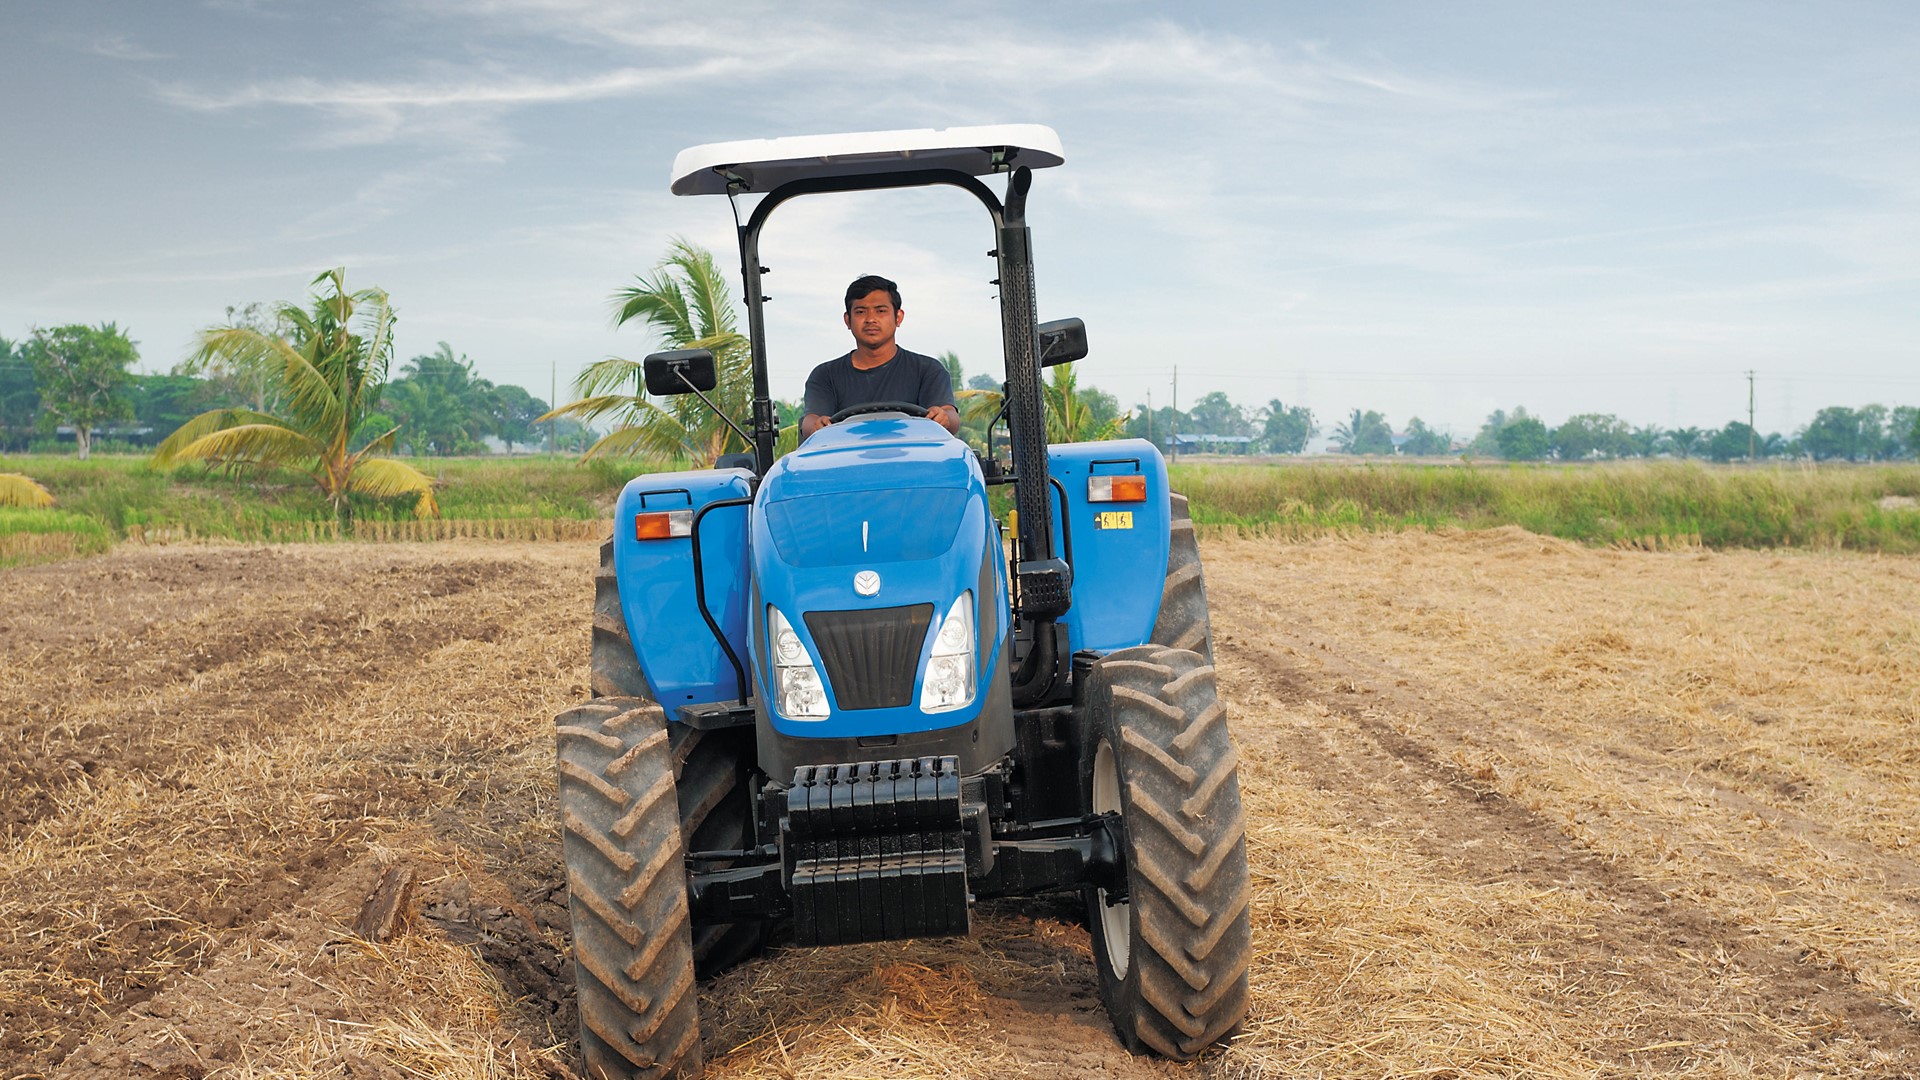 A New Holland TT4 Series tractor at work